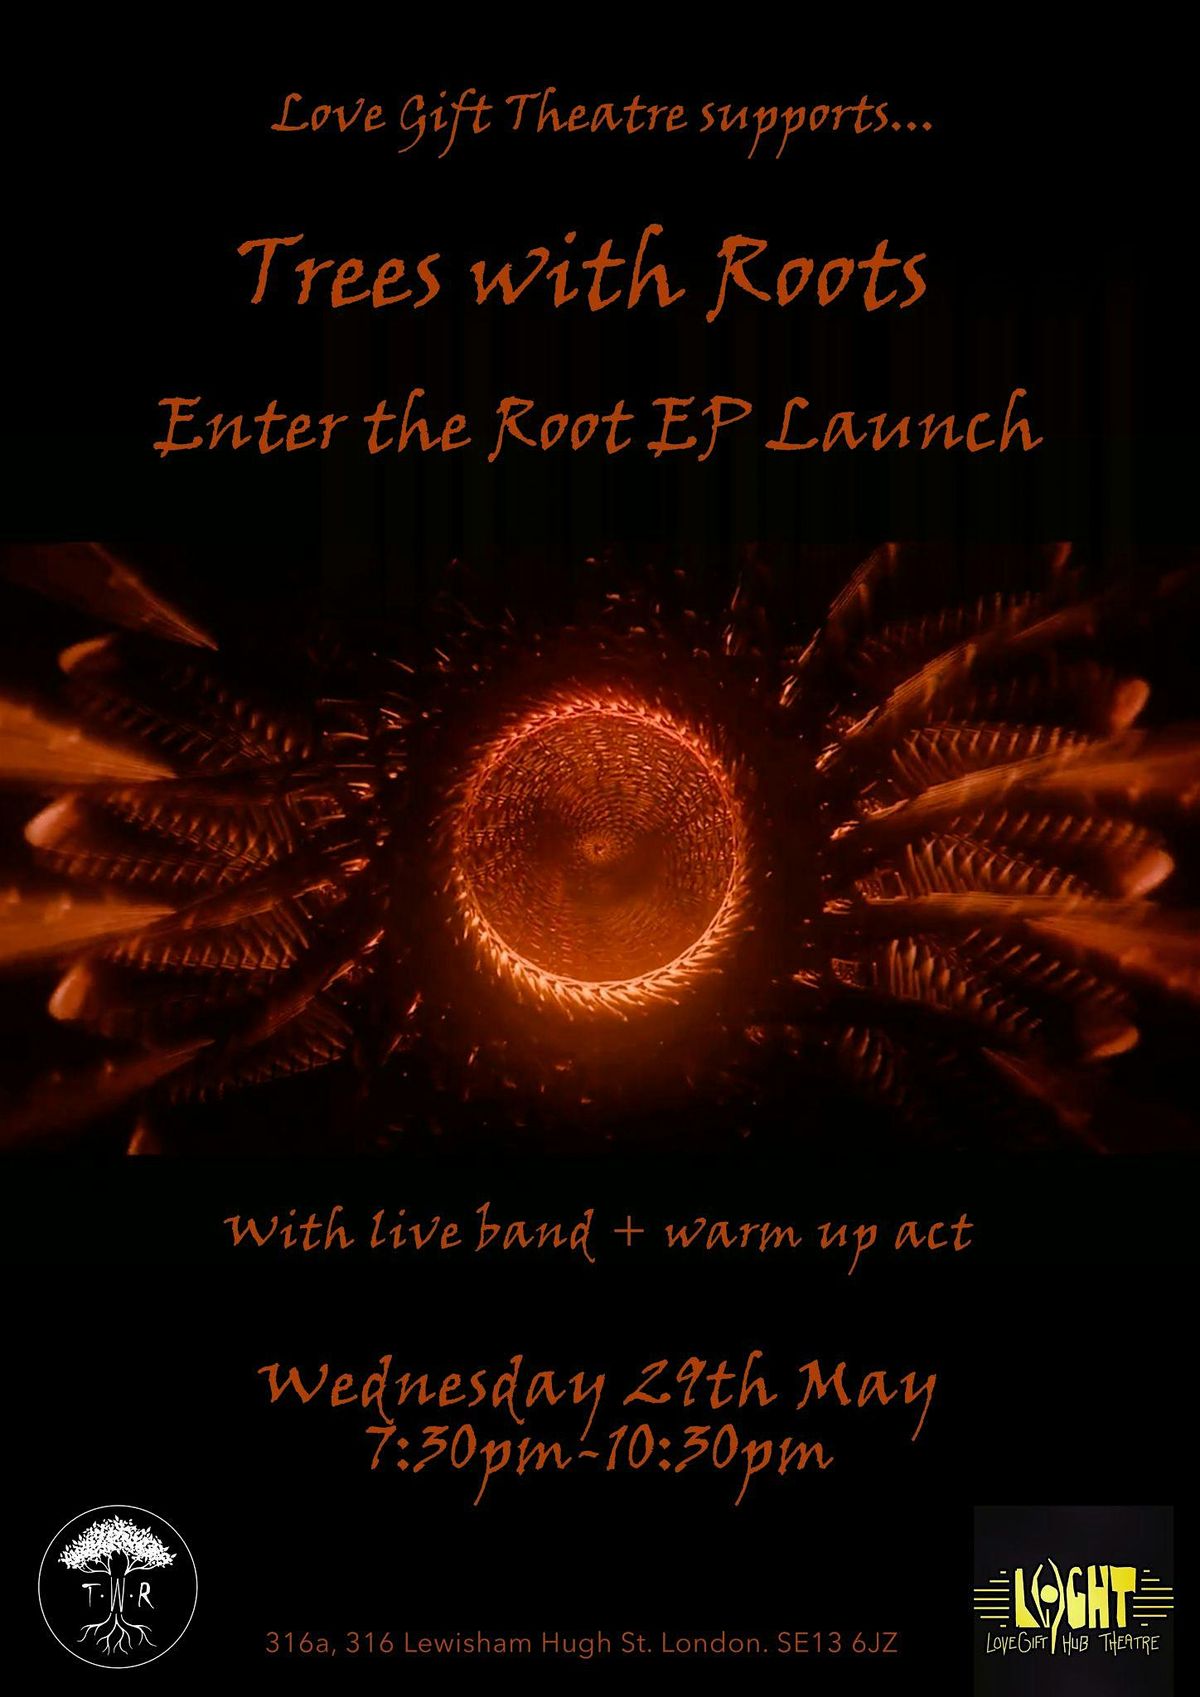 Enter the Root EP Launch